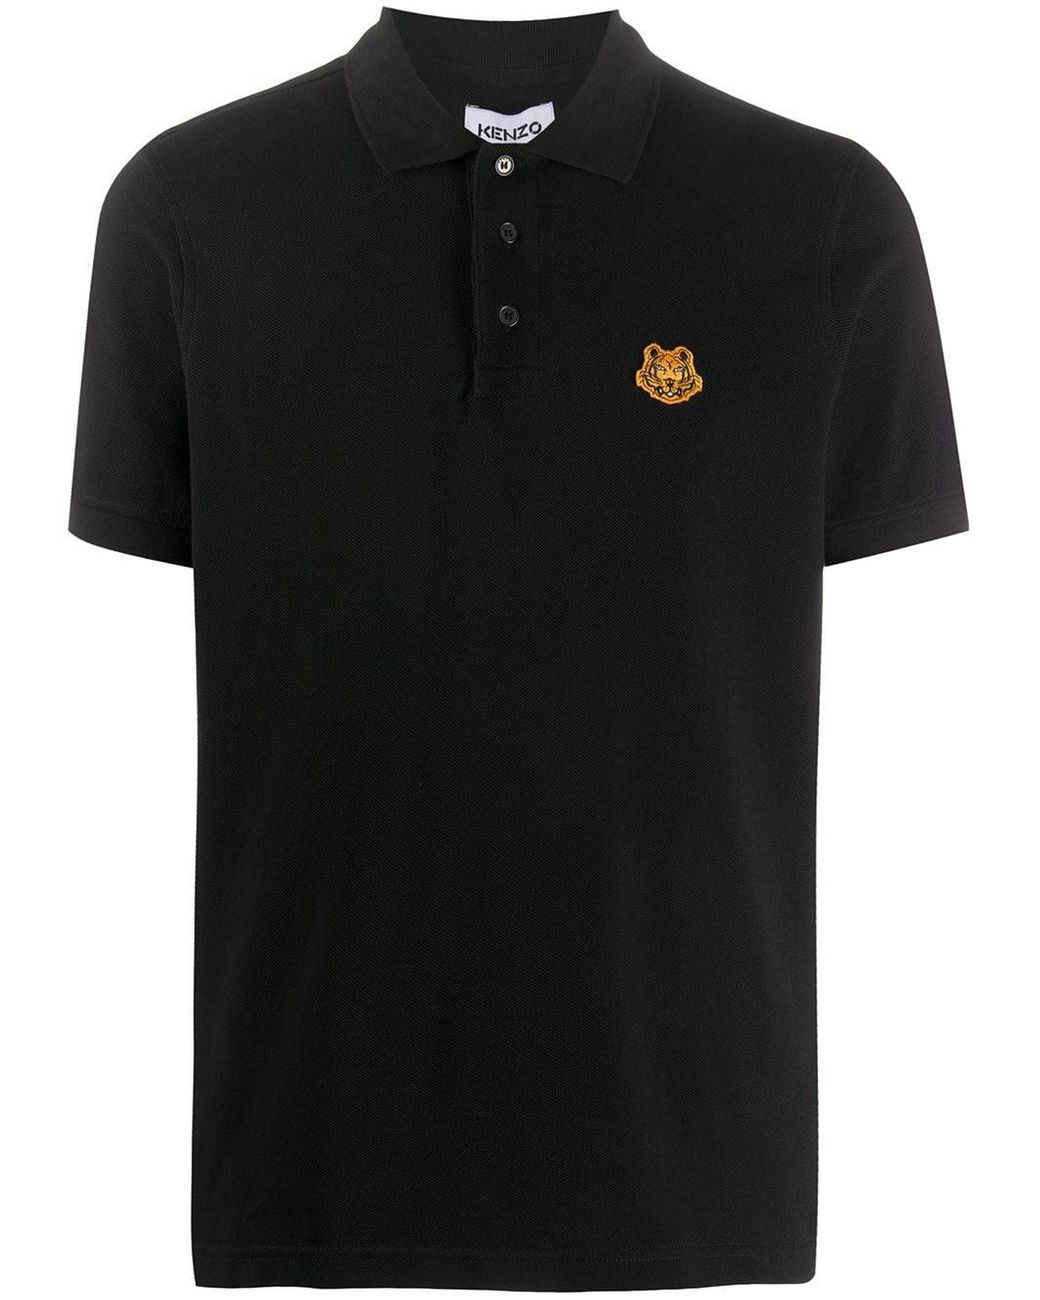 KENZO Cotton Tiger Patch Polo Shirt in Black for Men - Lyst